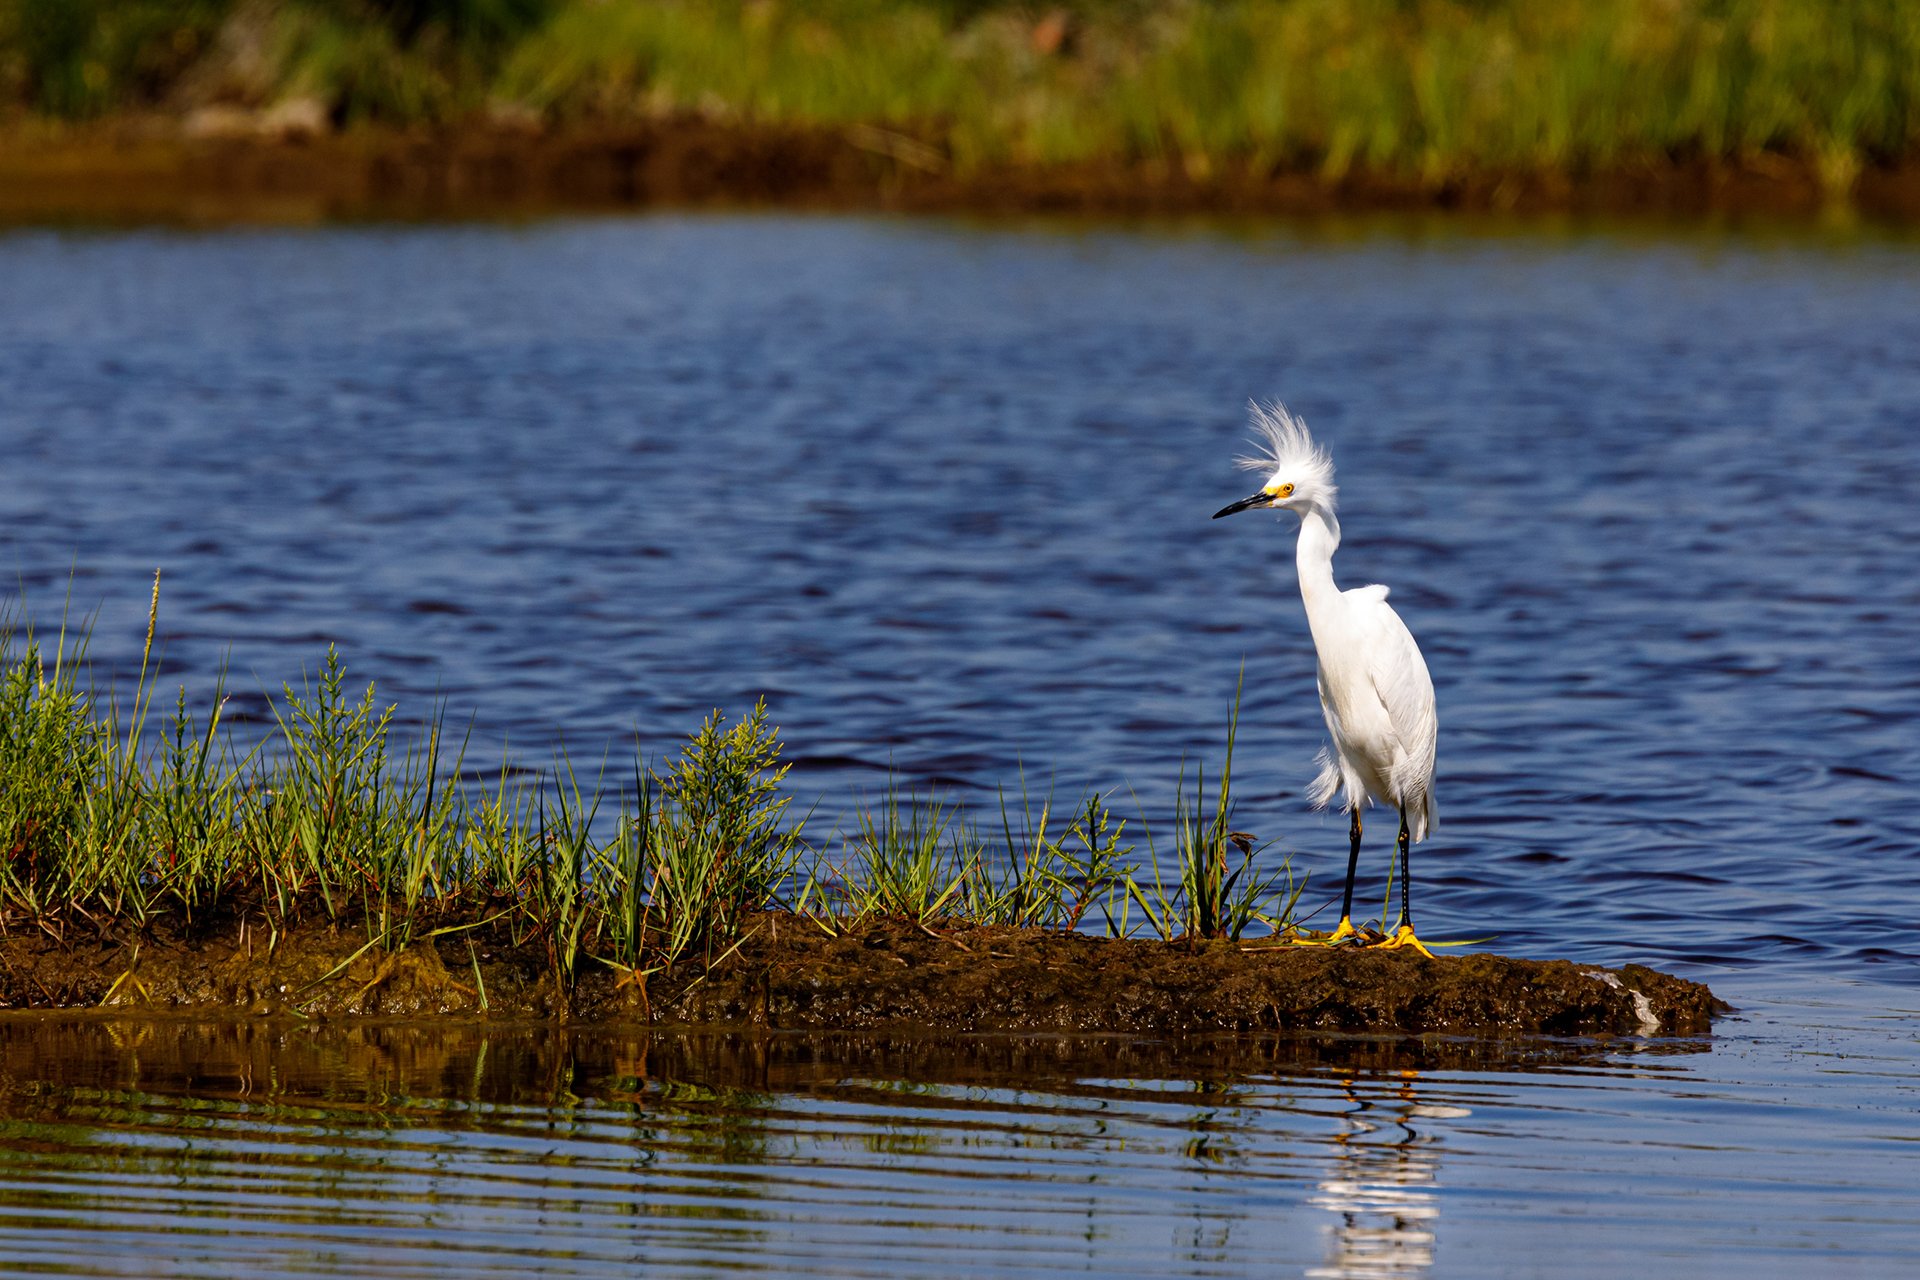 Snowy Egret standing on grassy island surrounded by water